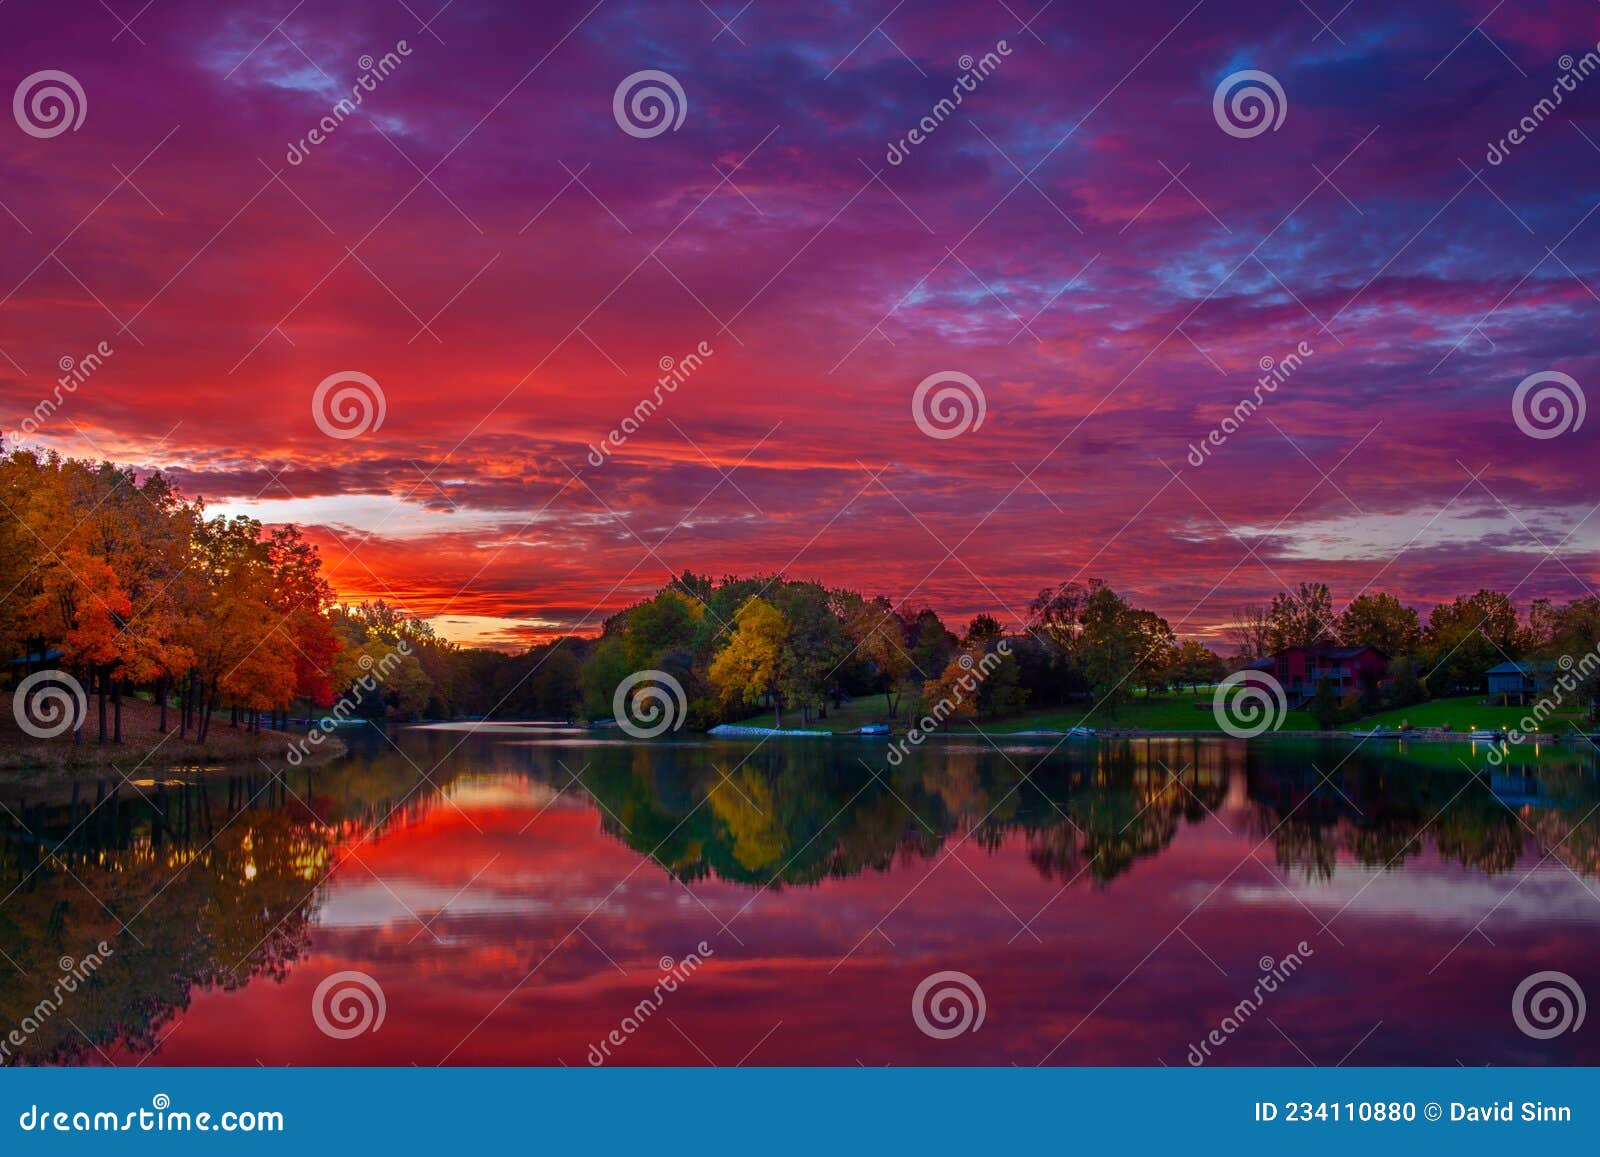 autumn sunrise over a lake in woodford county, illinois